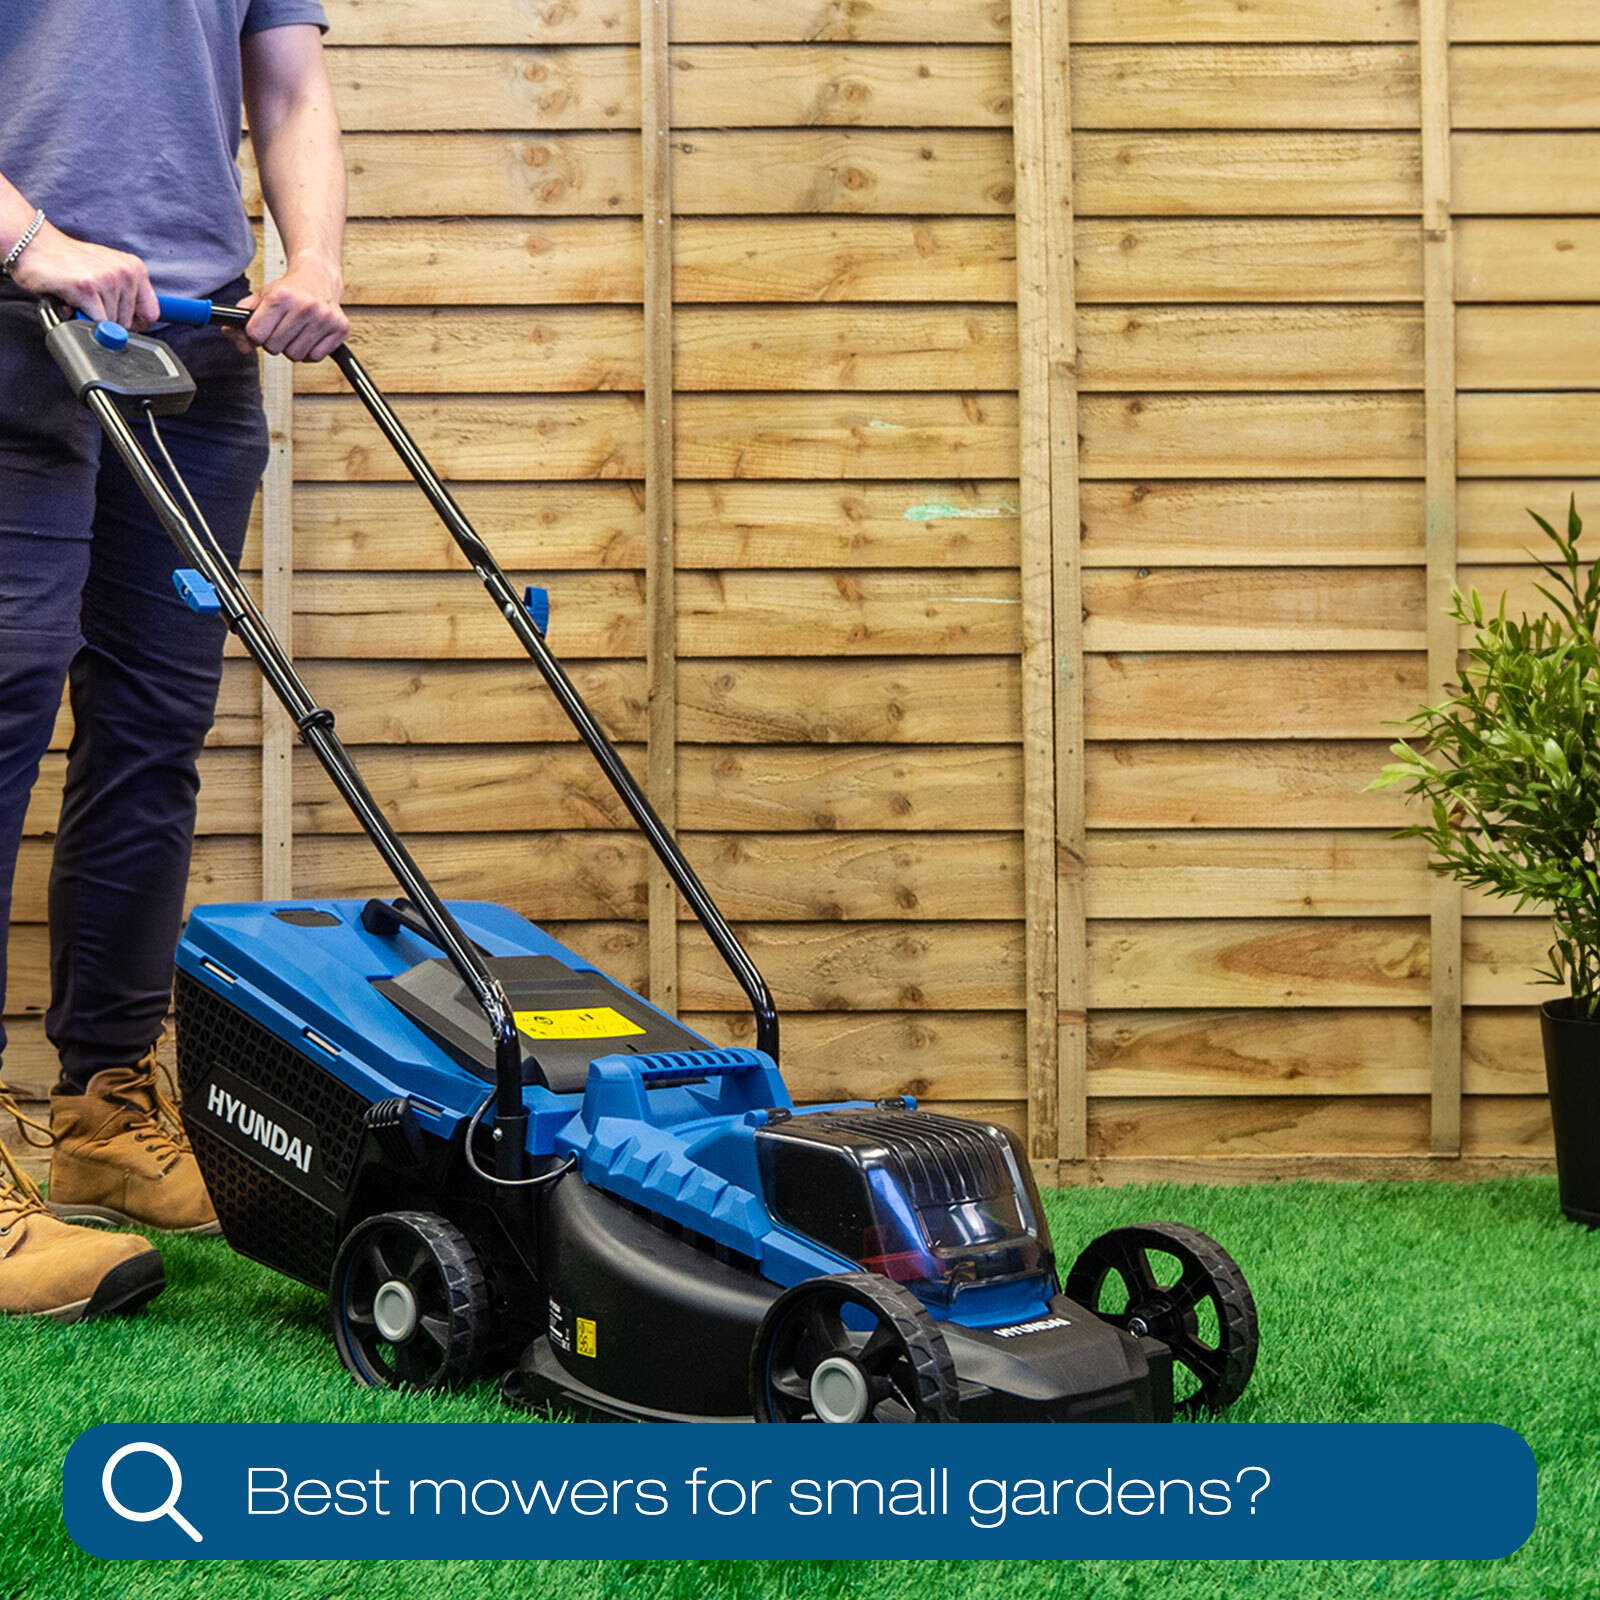 Best Mowers for small gardens?